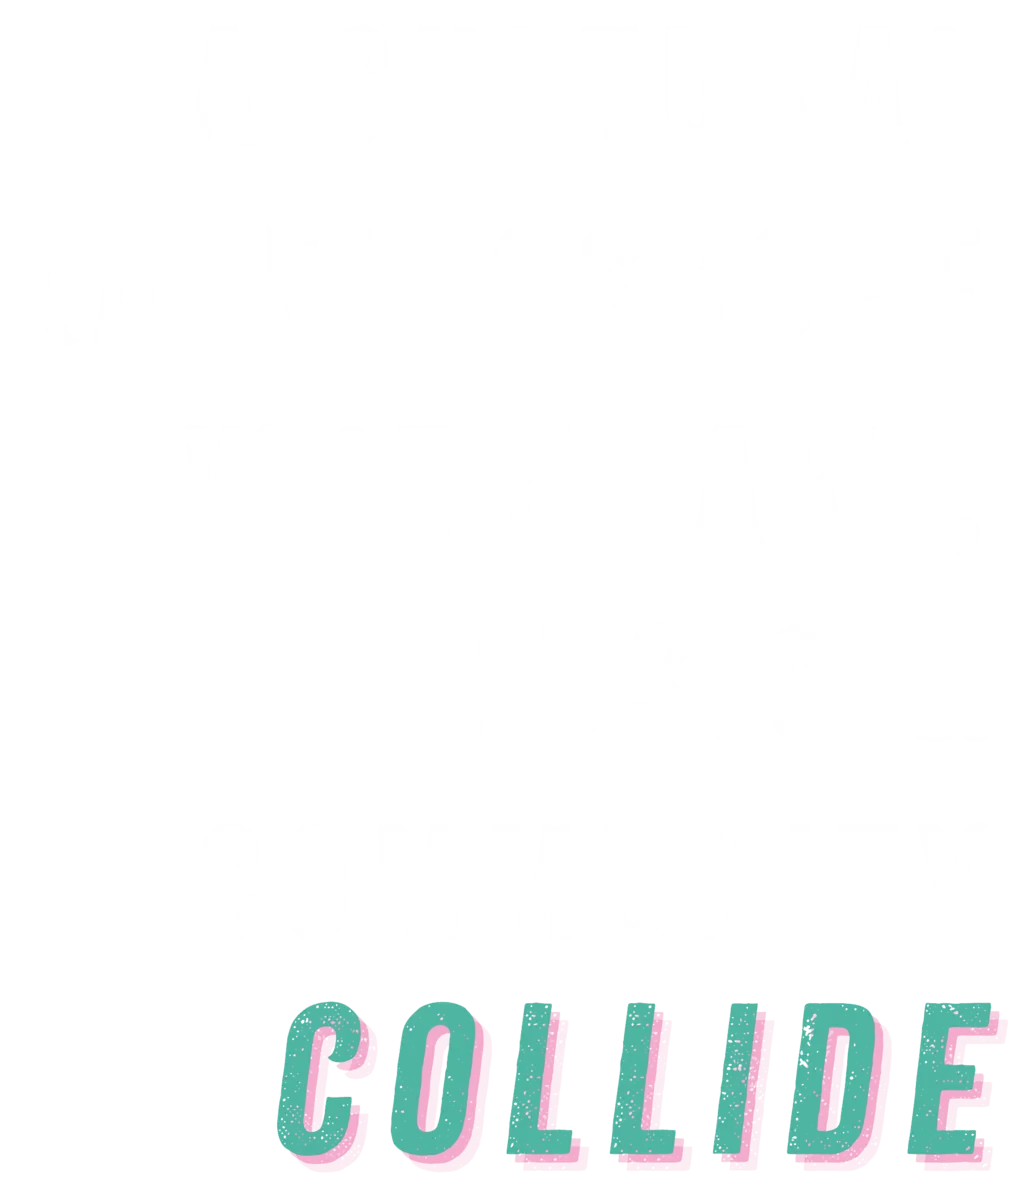 A cultural kaleidoscope where art, music and community collide